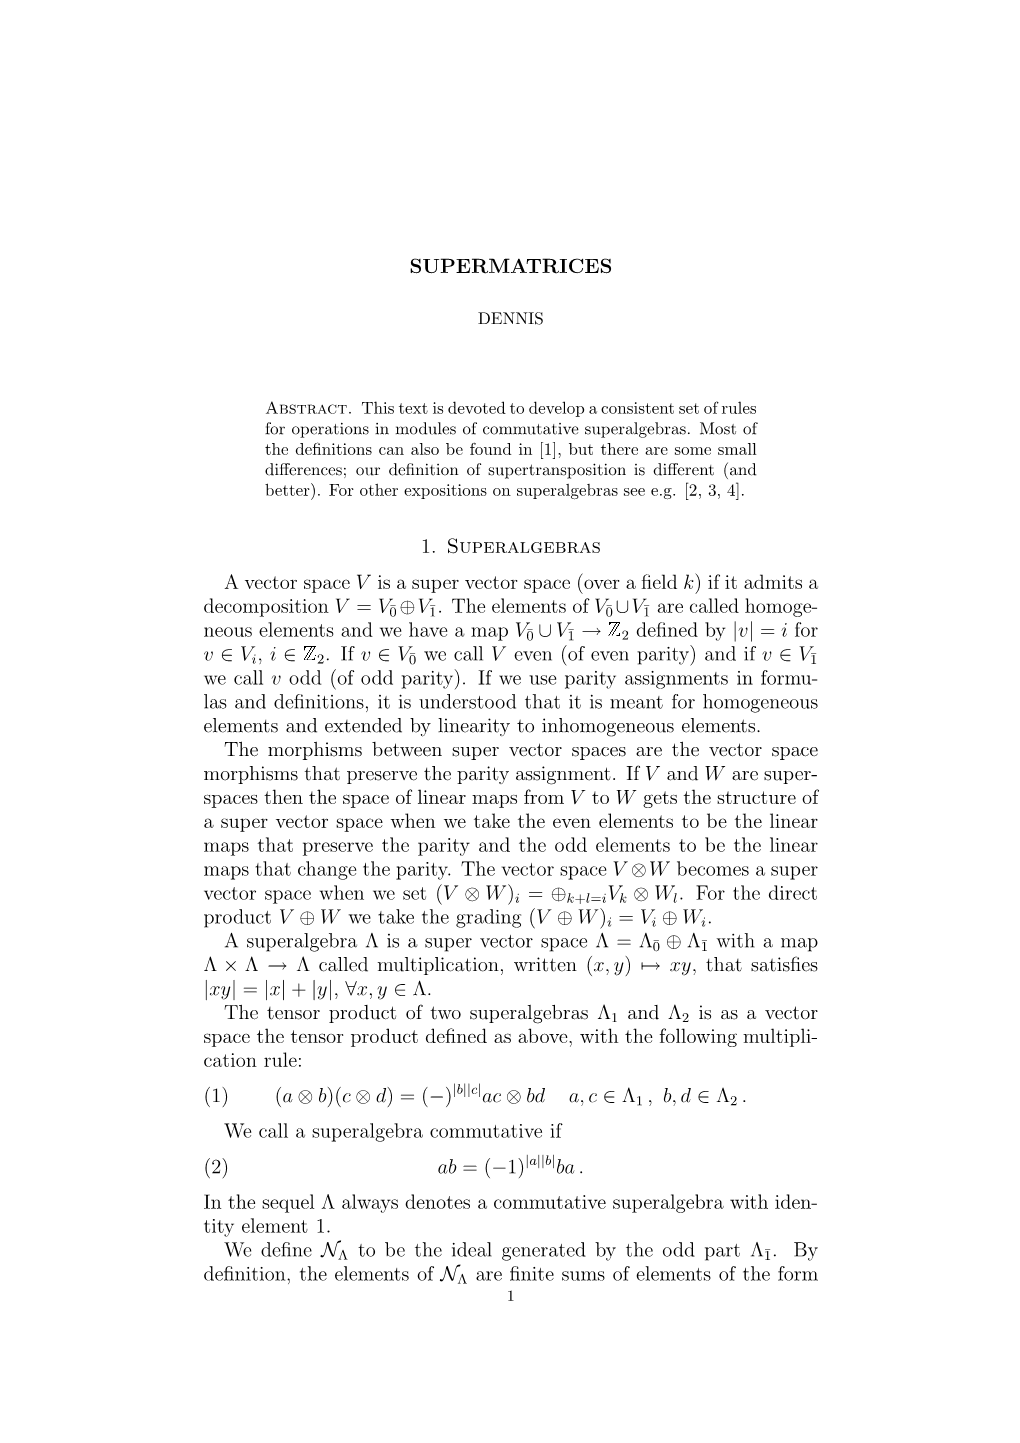 SUPERMATRICES 1. Superalgebras a Vector Space V Is a Super Vector